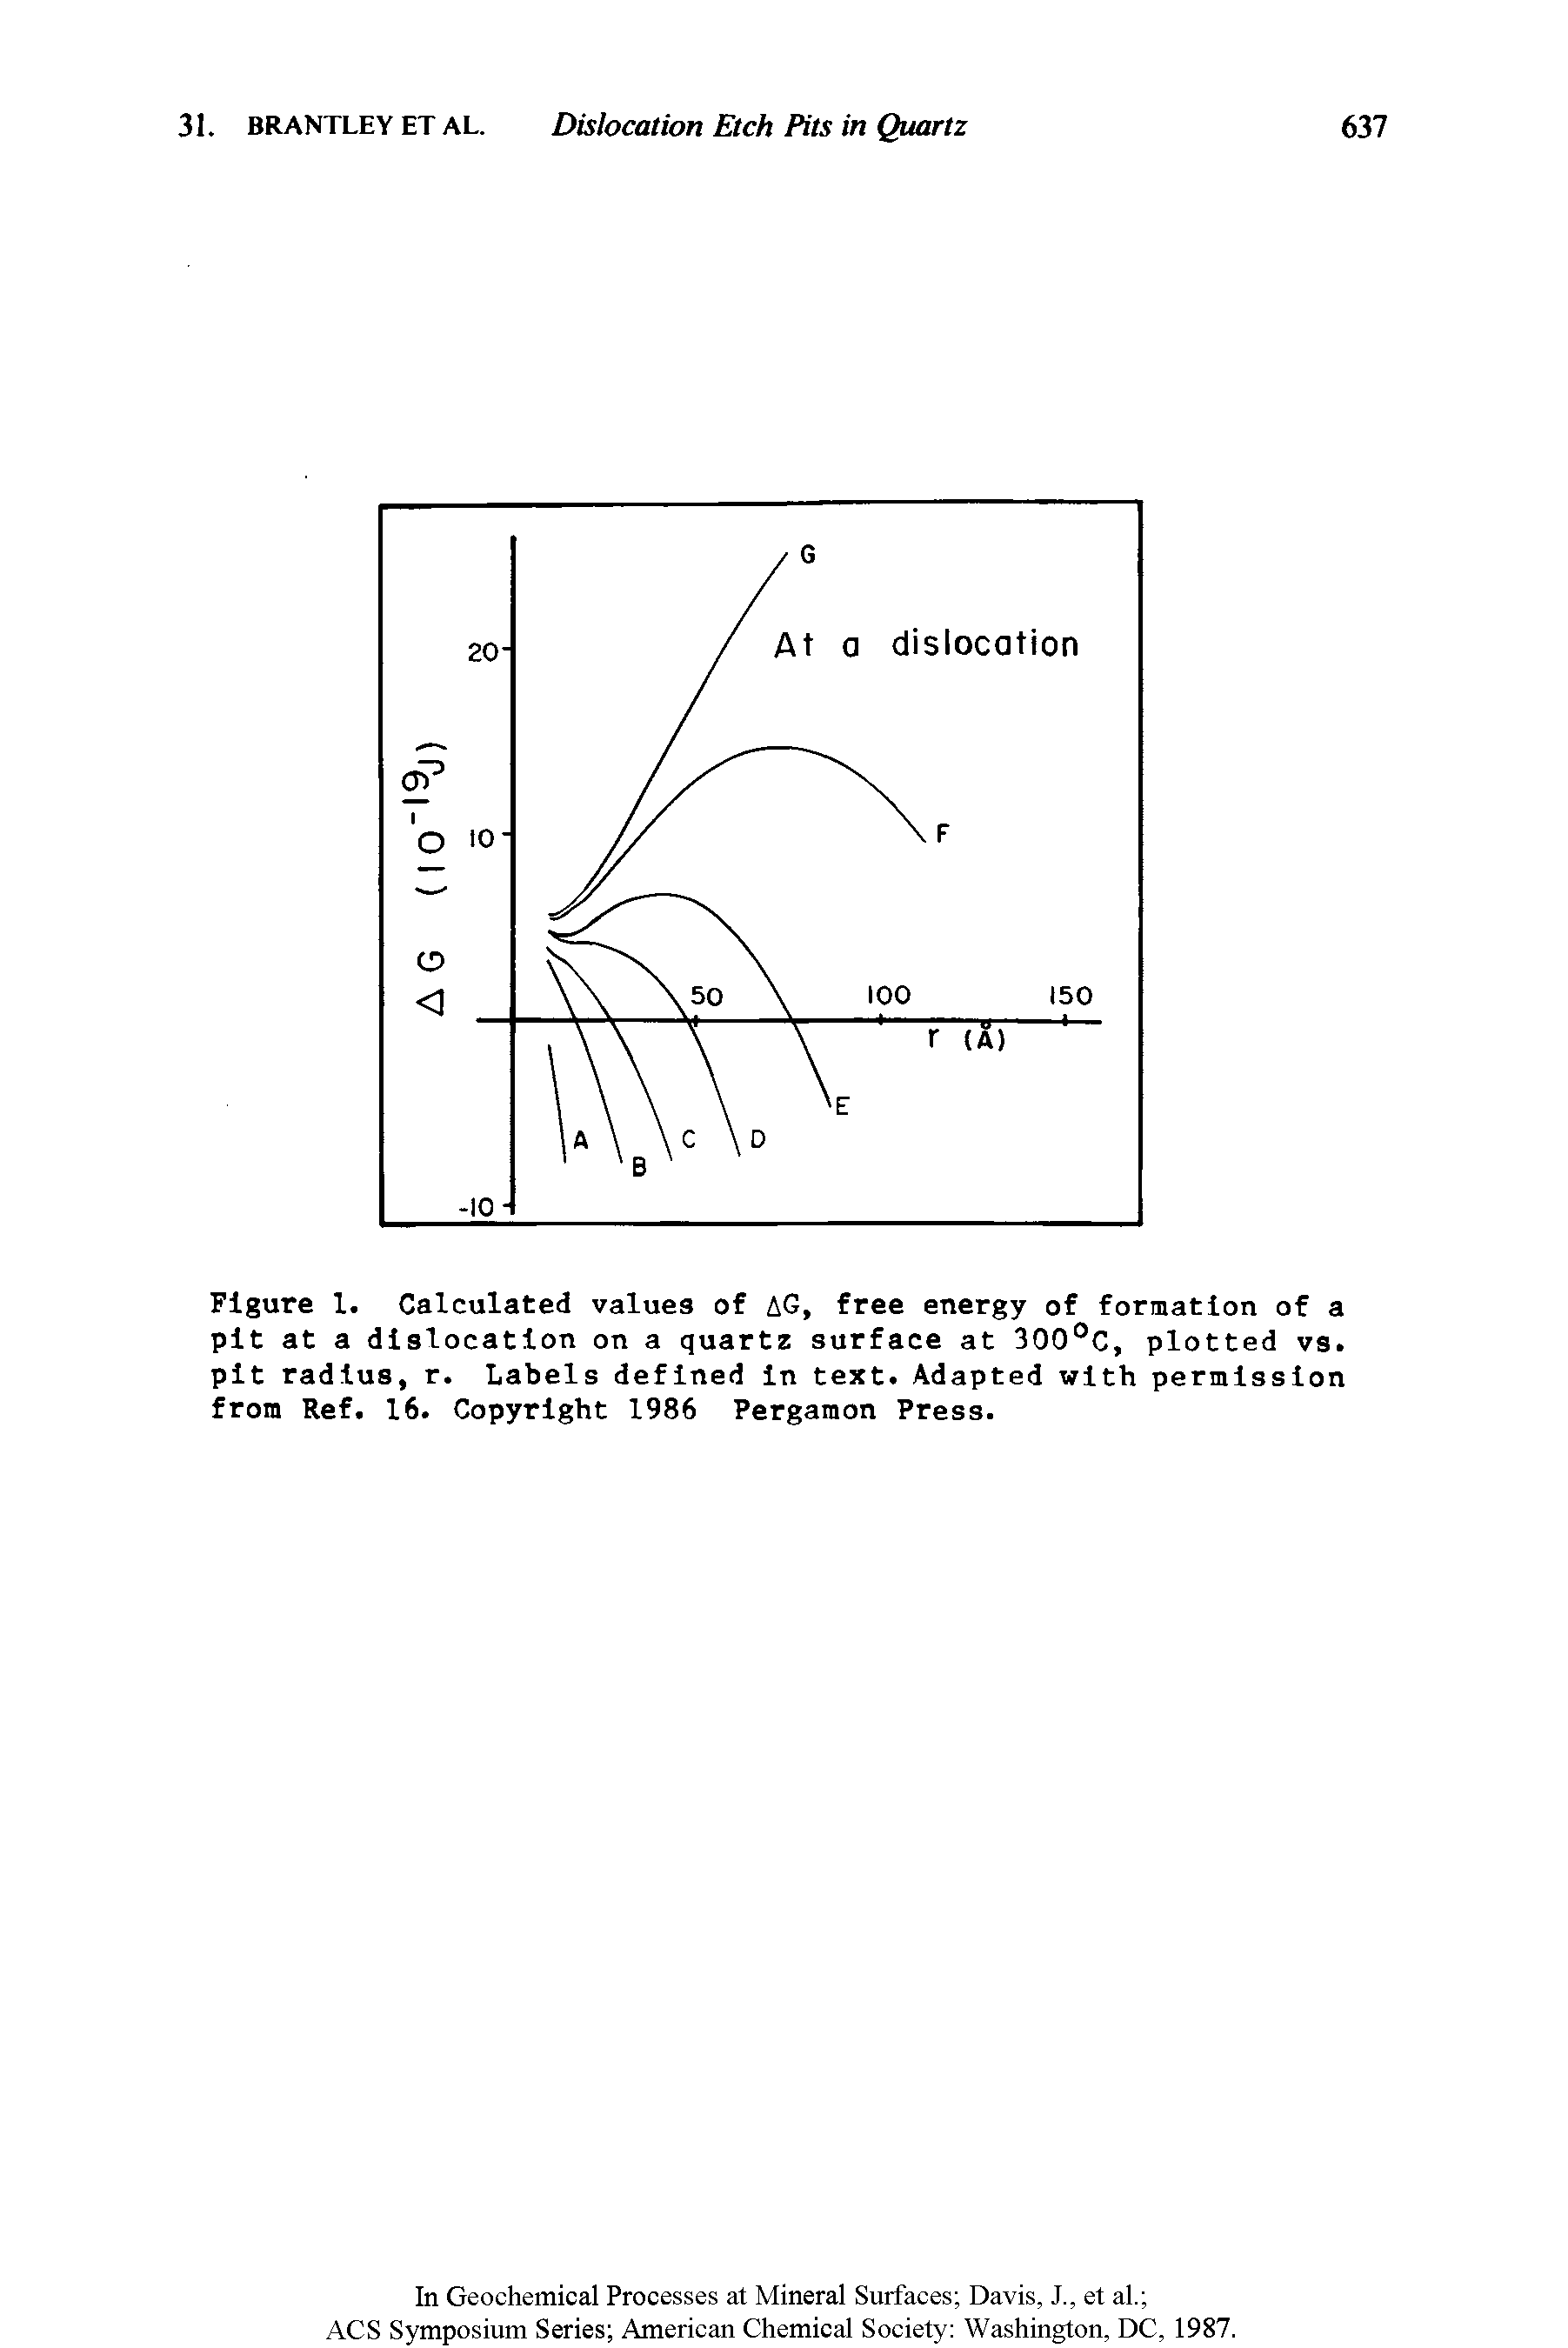 Figure 1. Calculated values of AG, free energy of formation of a pit at a dislocation on a quartz surface at 300°C, plotted vs. pit radius, r. Labels defined in text. Adapted with permission from Ref. 16. Copyright 1986 Pergamon Press.